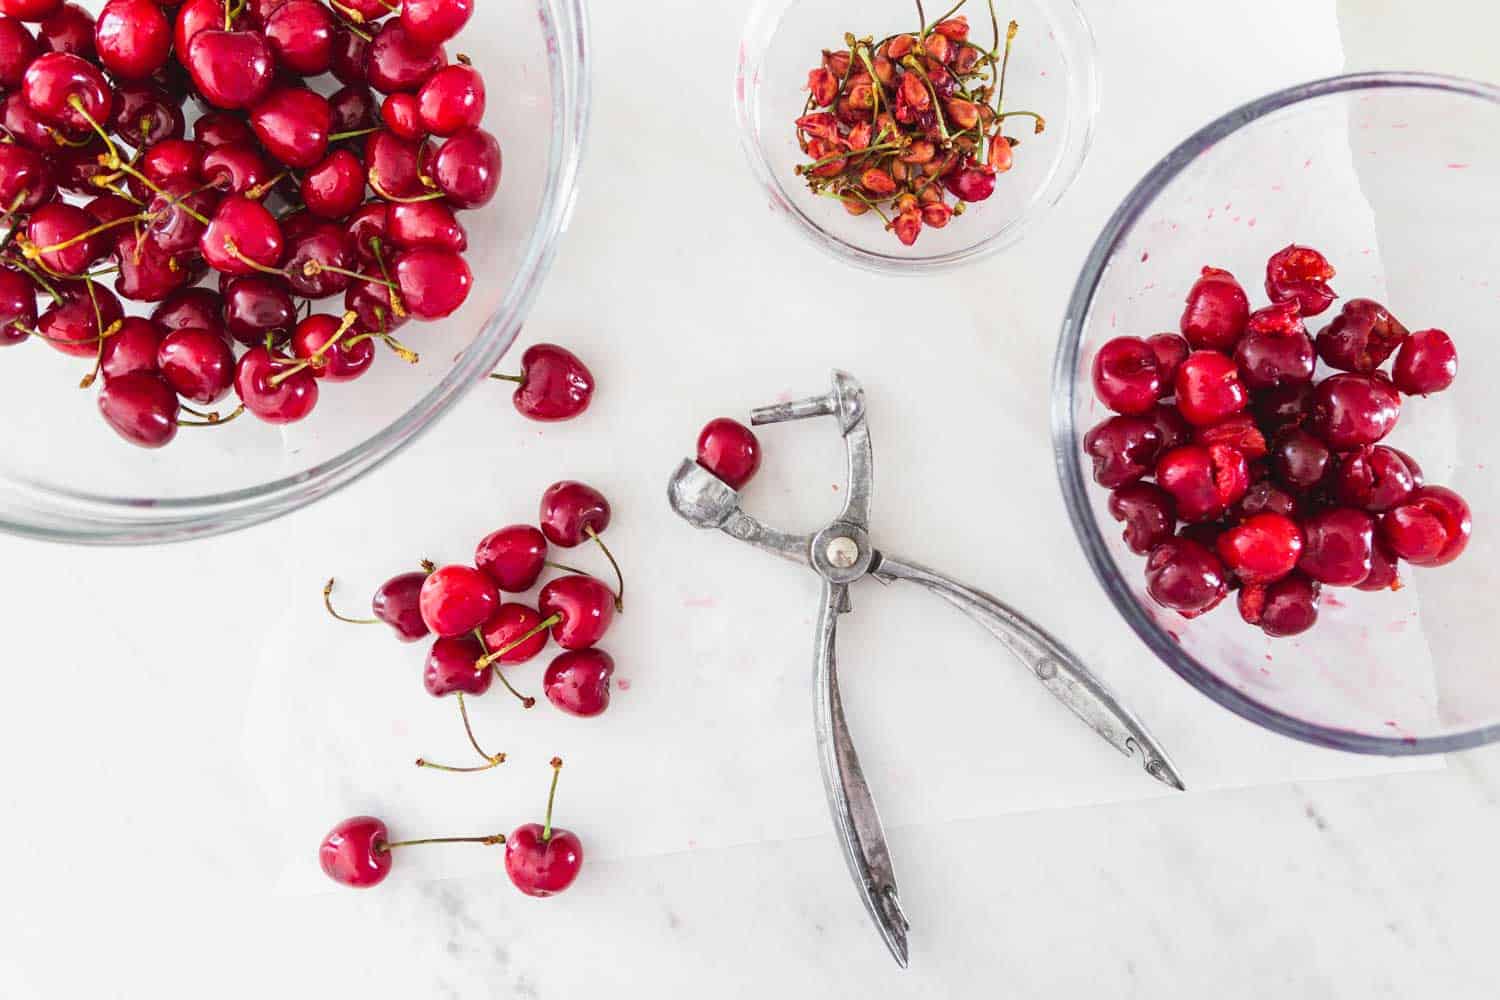 Pitting cherries with a special tool